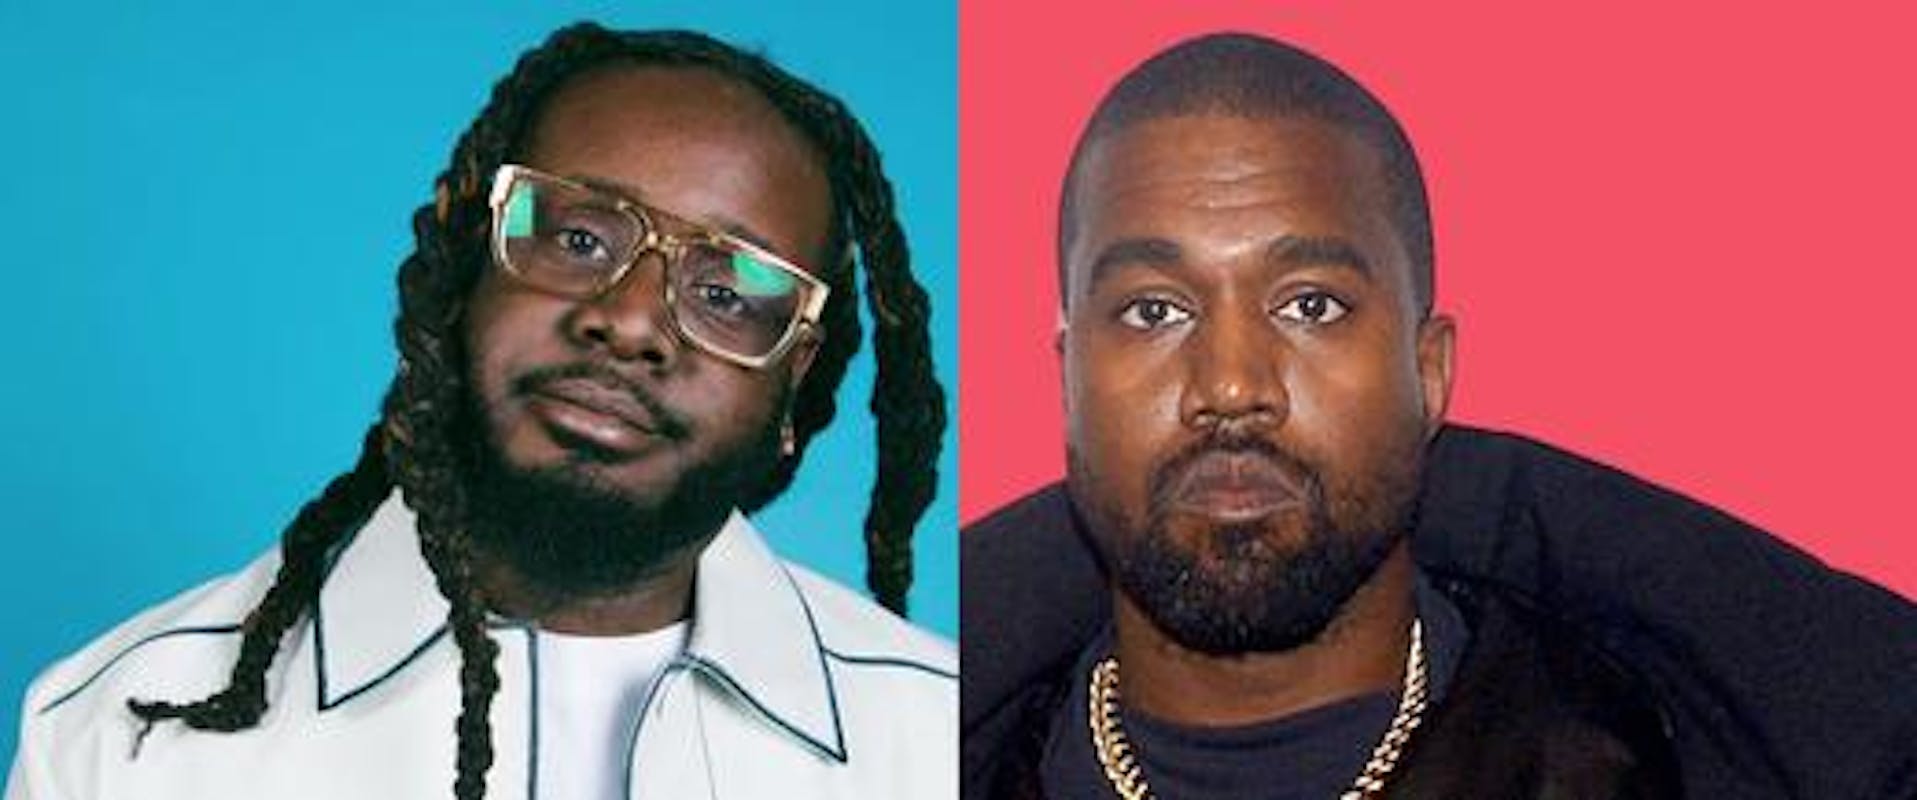 T-Pain accuses Kayne West of Stealing His Bars